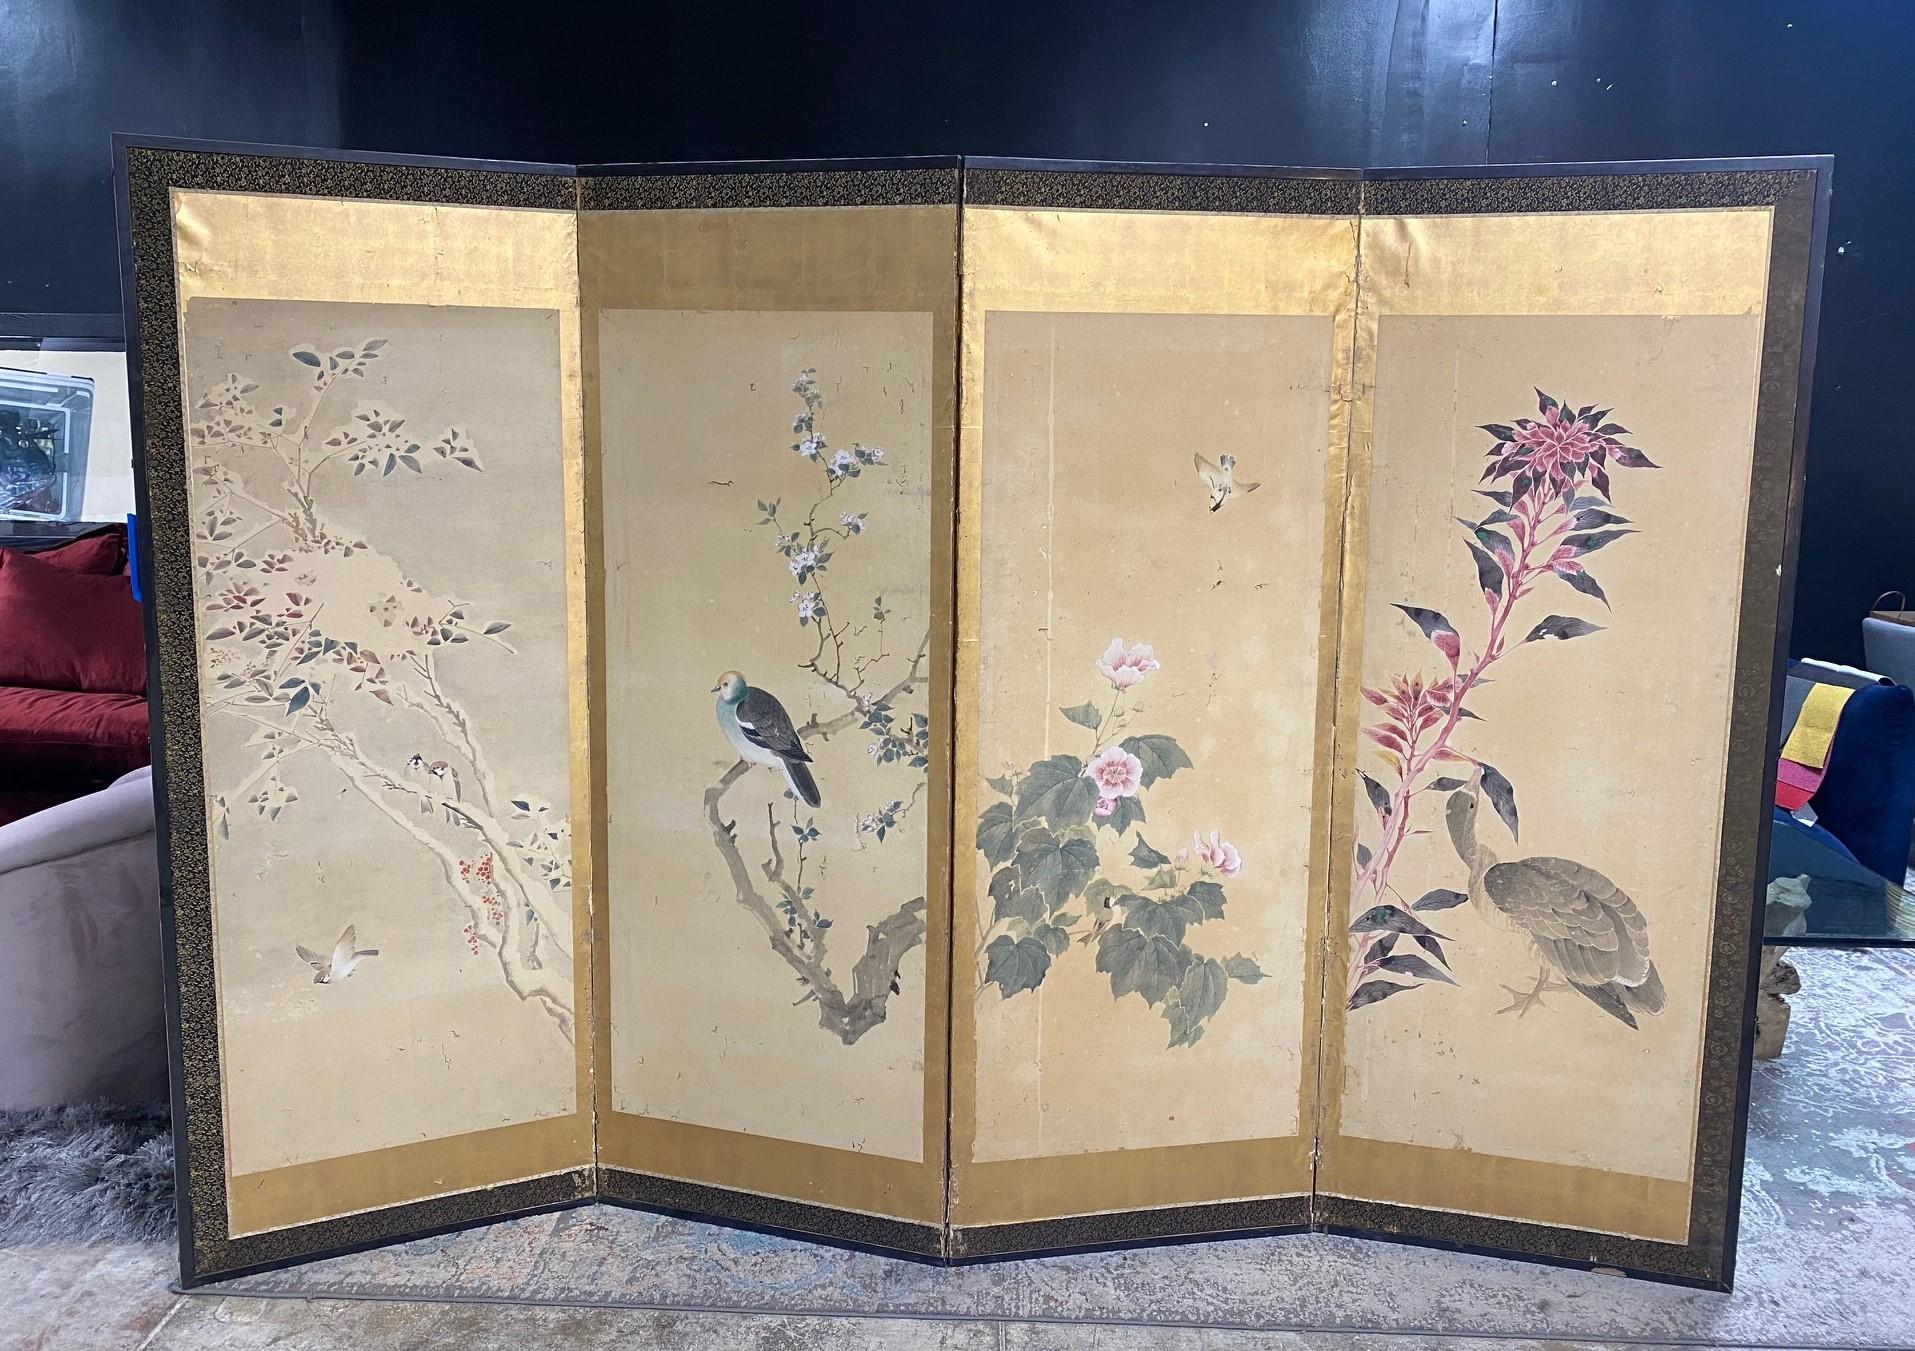 A gorgeous hand-painted four-panel Japanese Byobu folding screen depicting various nature/landscape scenes with an array of bird species and blossoming flowers.  The rich colors, gold leaf, complex design/composition, and beautiful hand-painted